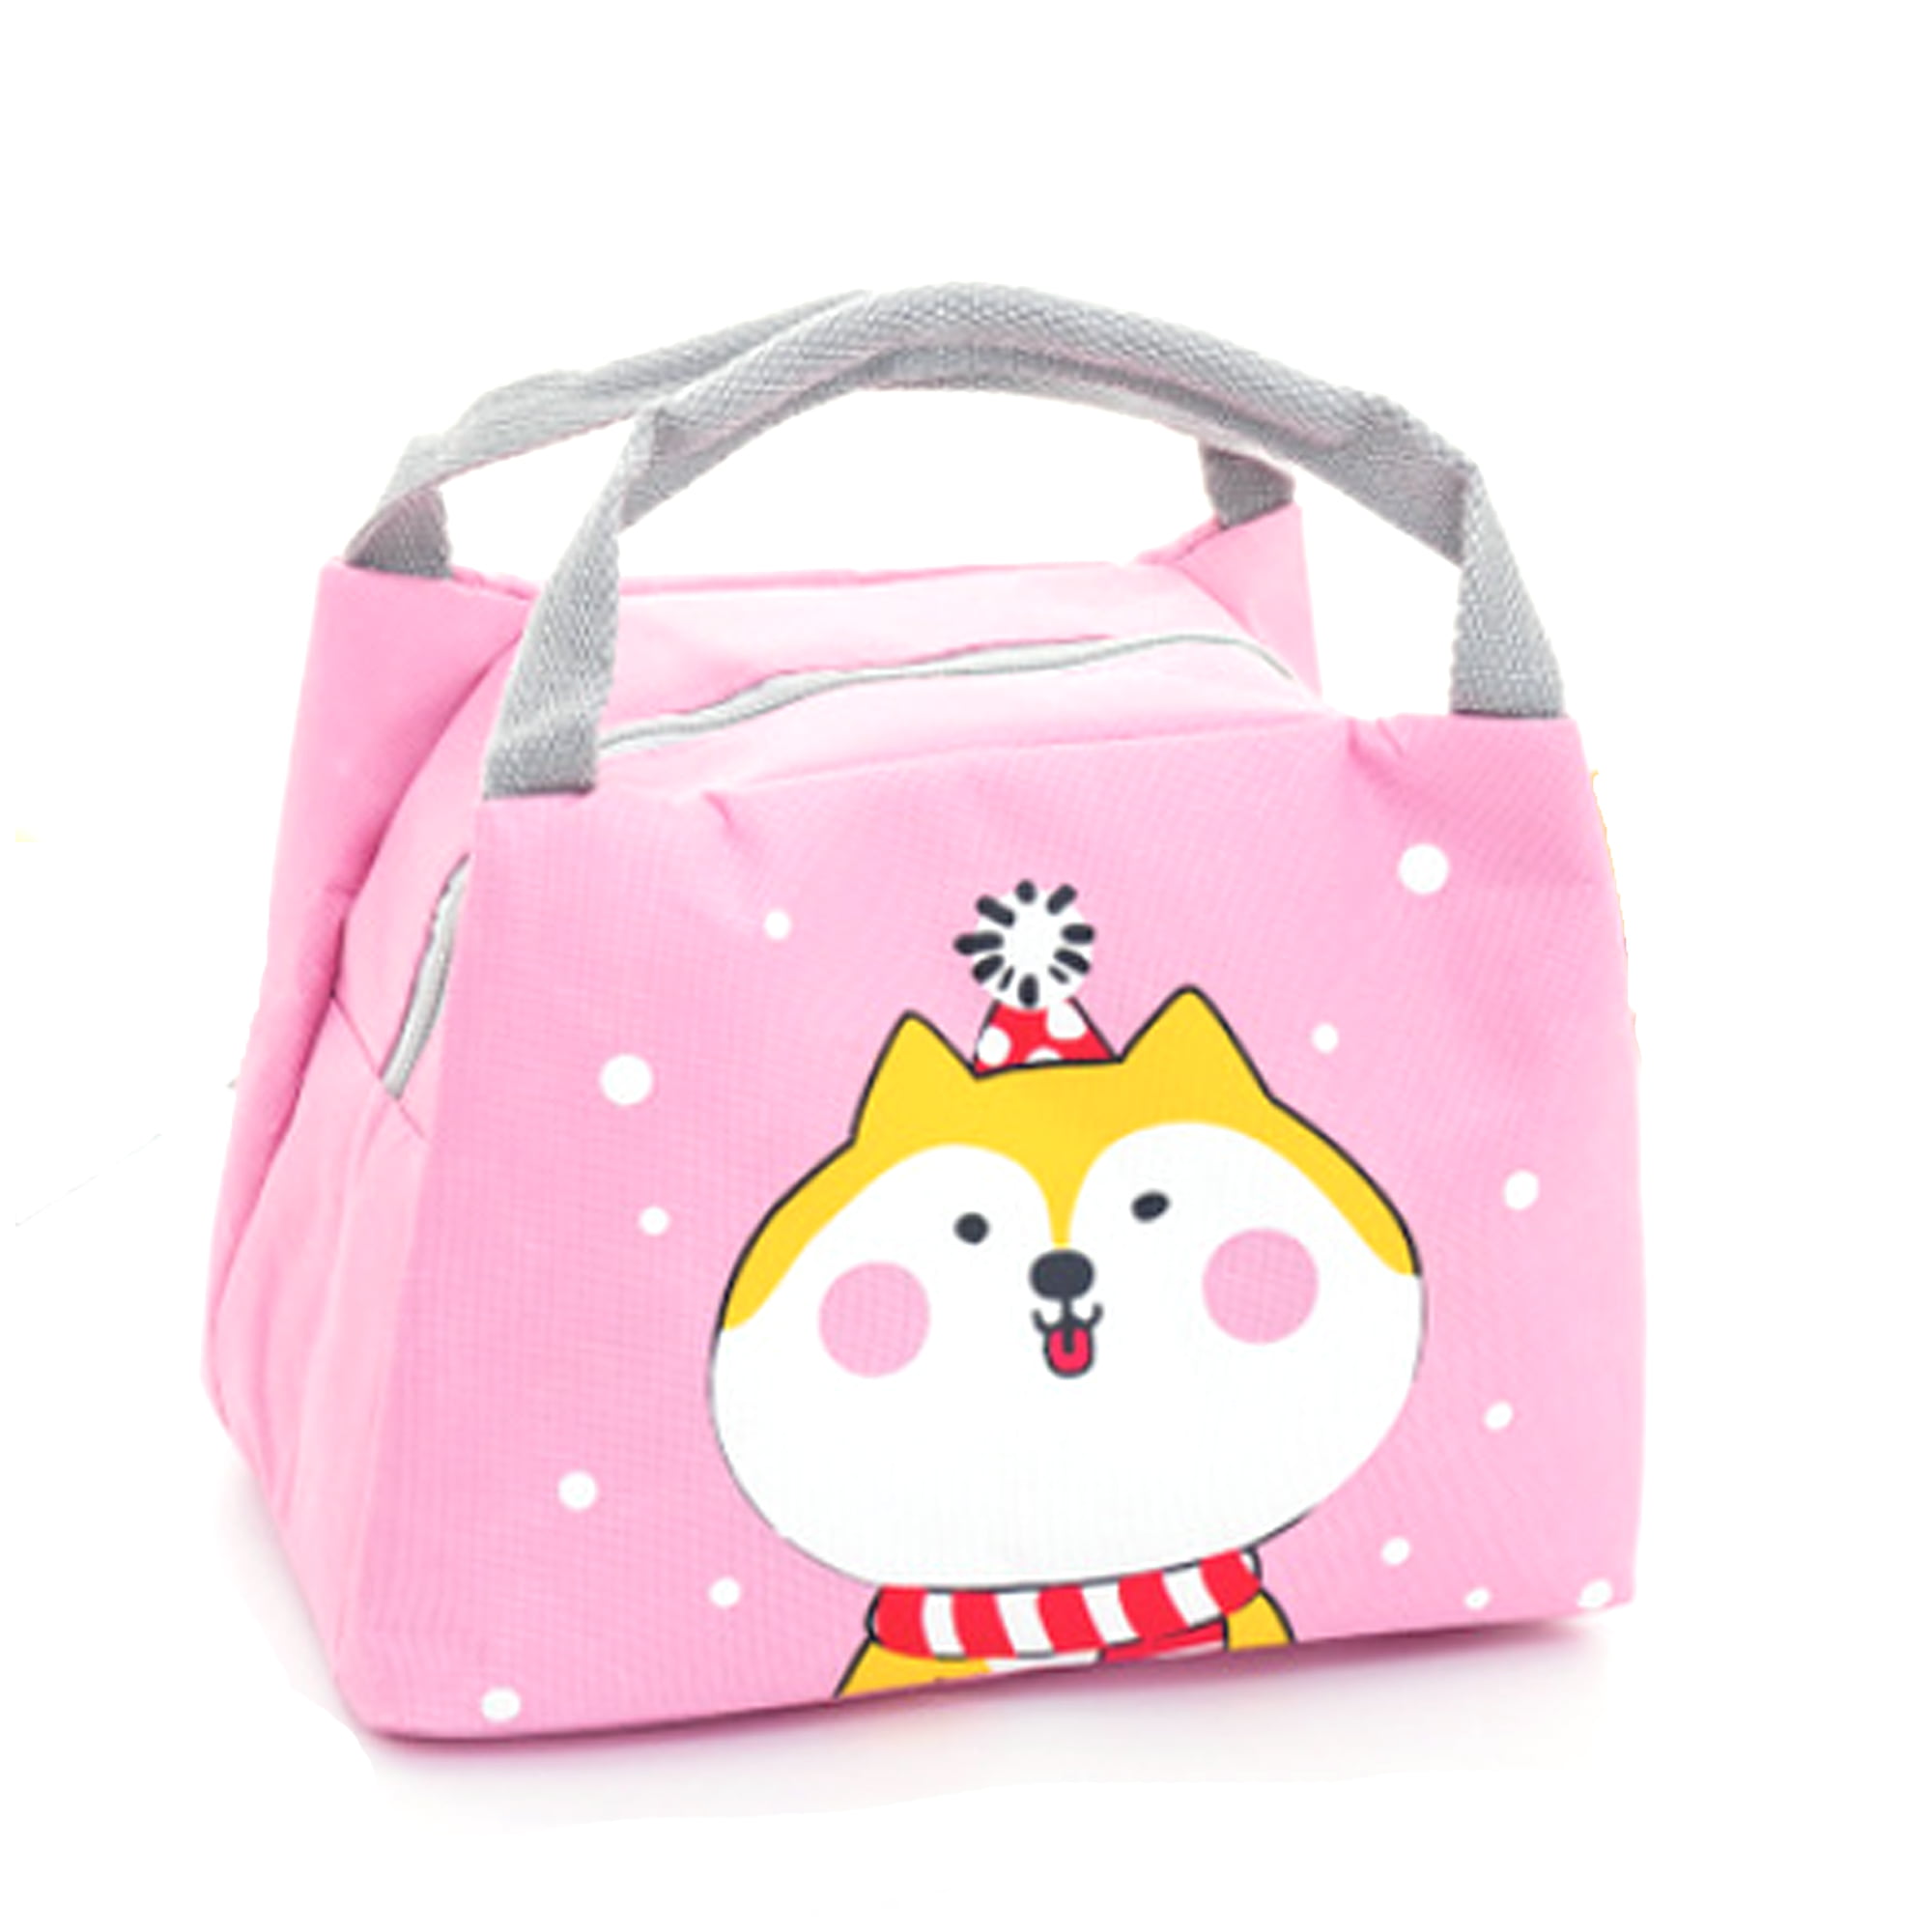 Cartoon Girl Oxford Cloth Insulated Lunch Bag Cool Tote Picnic Beach Food Holder 